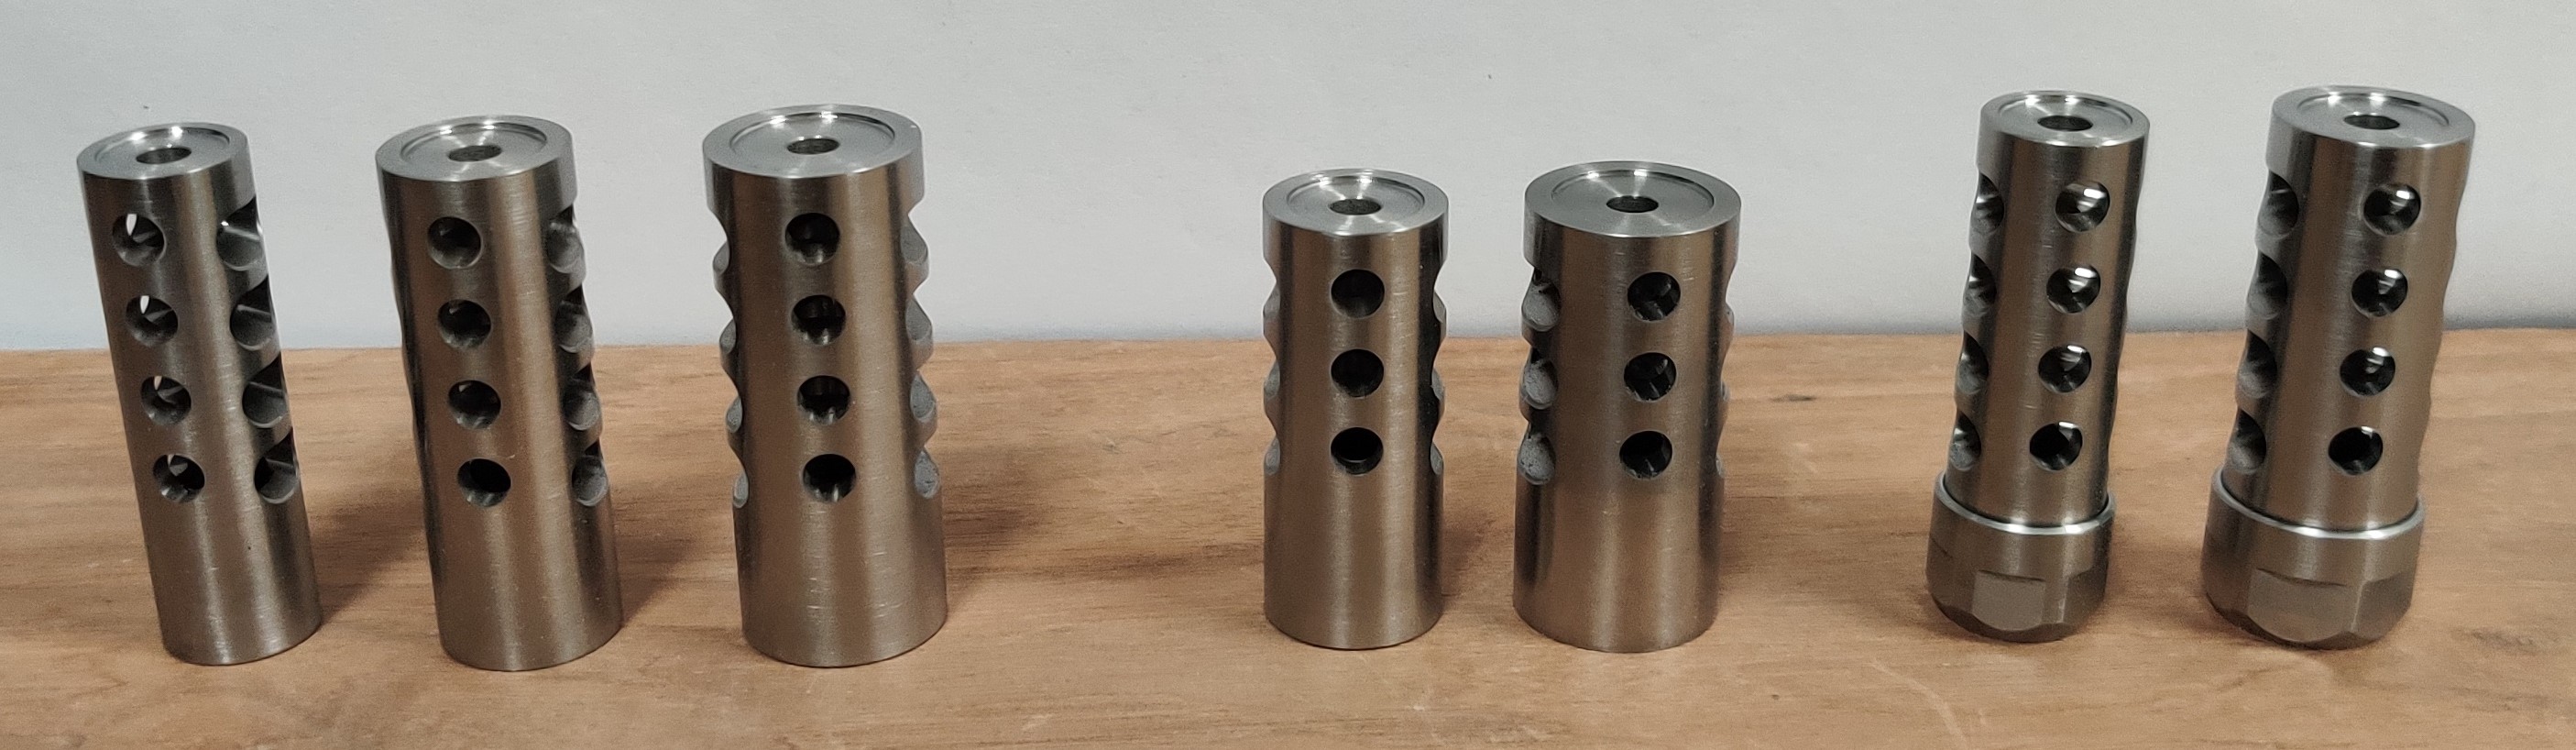 six muzzle brakes, side by side